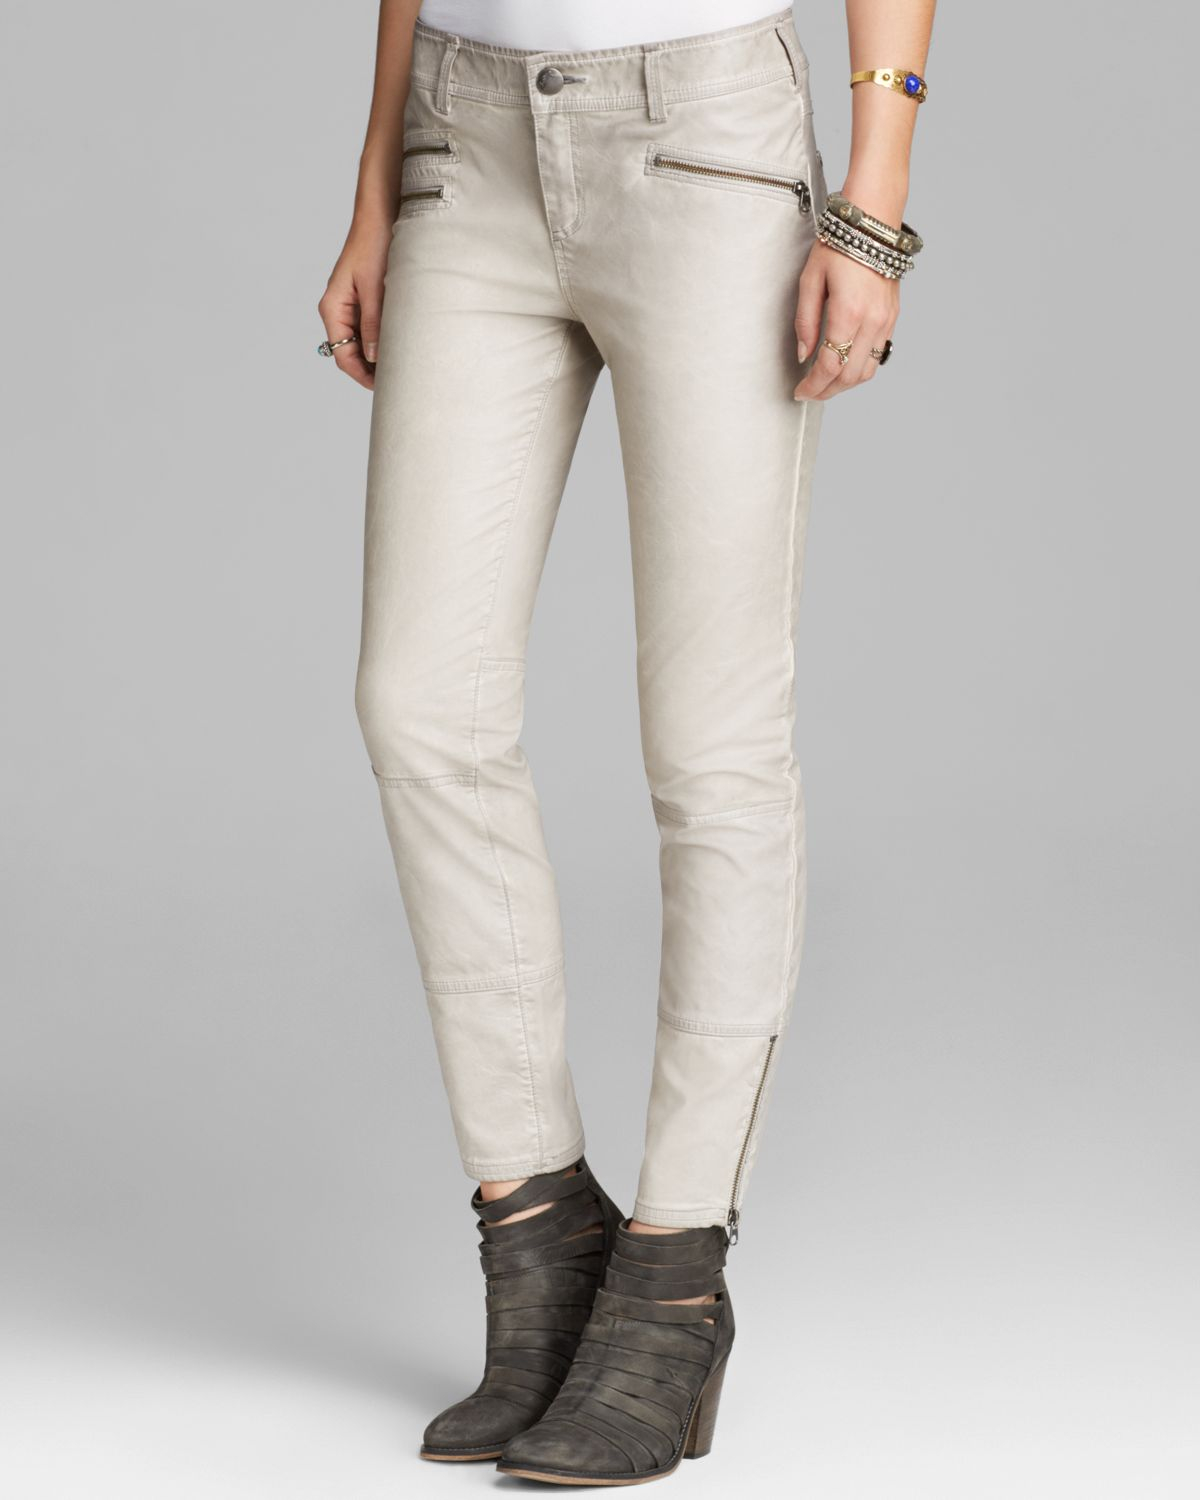 white leather skinny pants